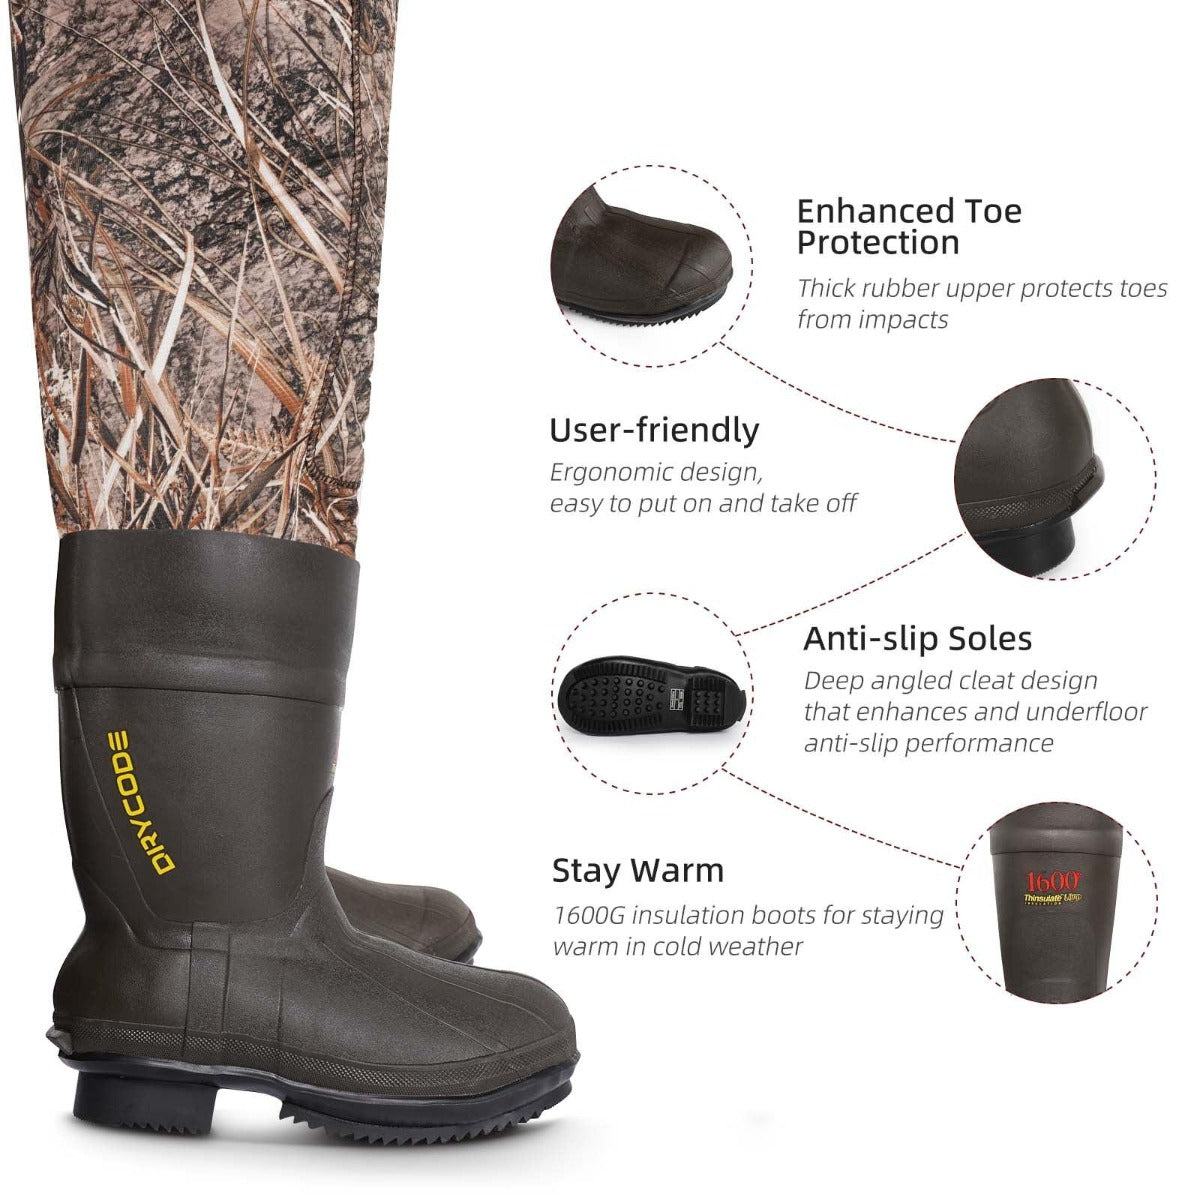 Chest Waders with Boots 1600g Insulated Neoprene Waders for Waterfowl